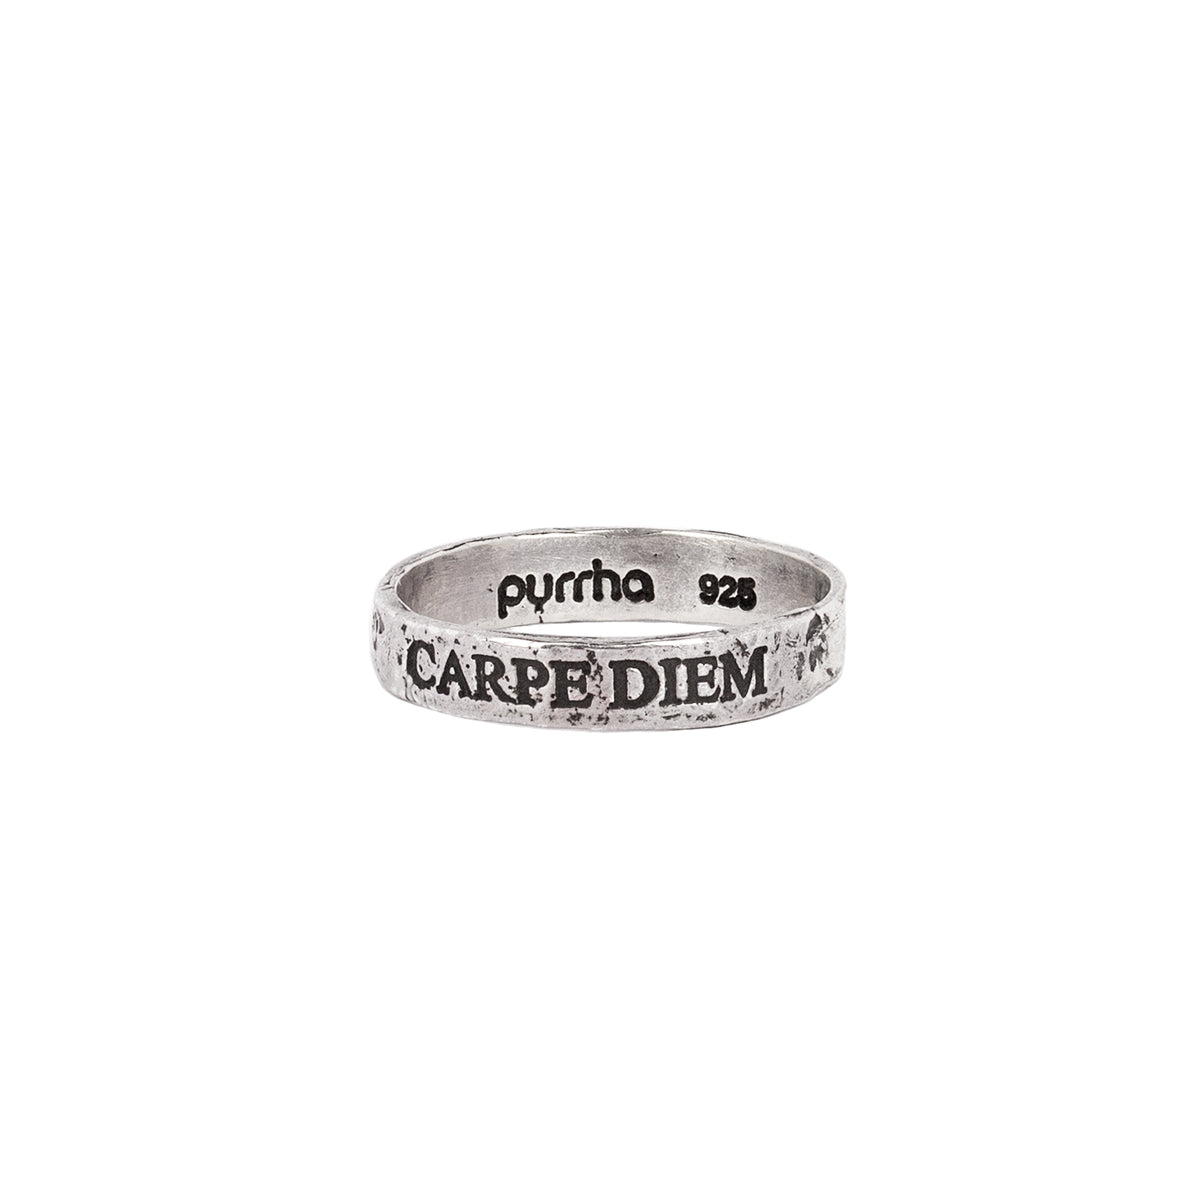 A silver band ring with the phrase Carpe Diem engraved into it